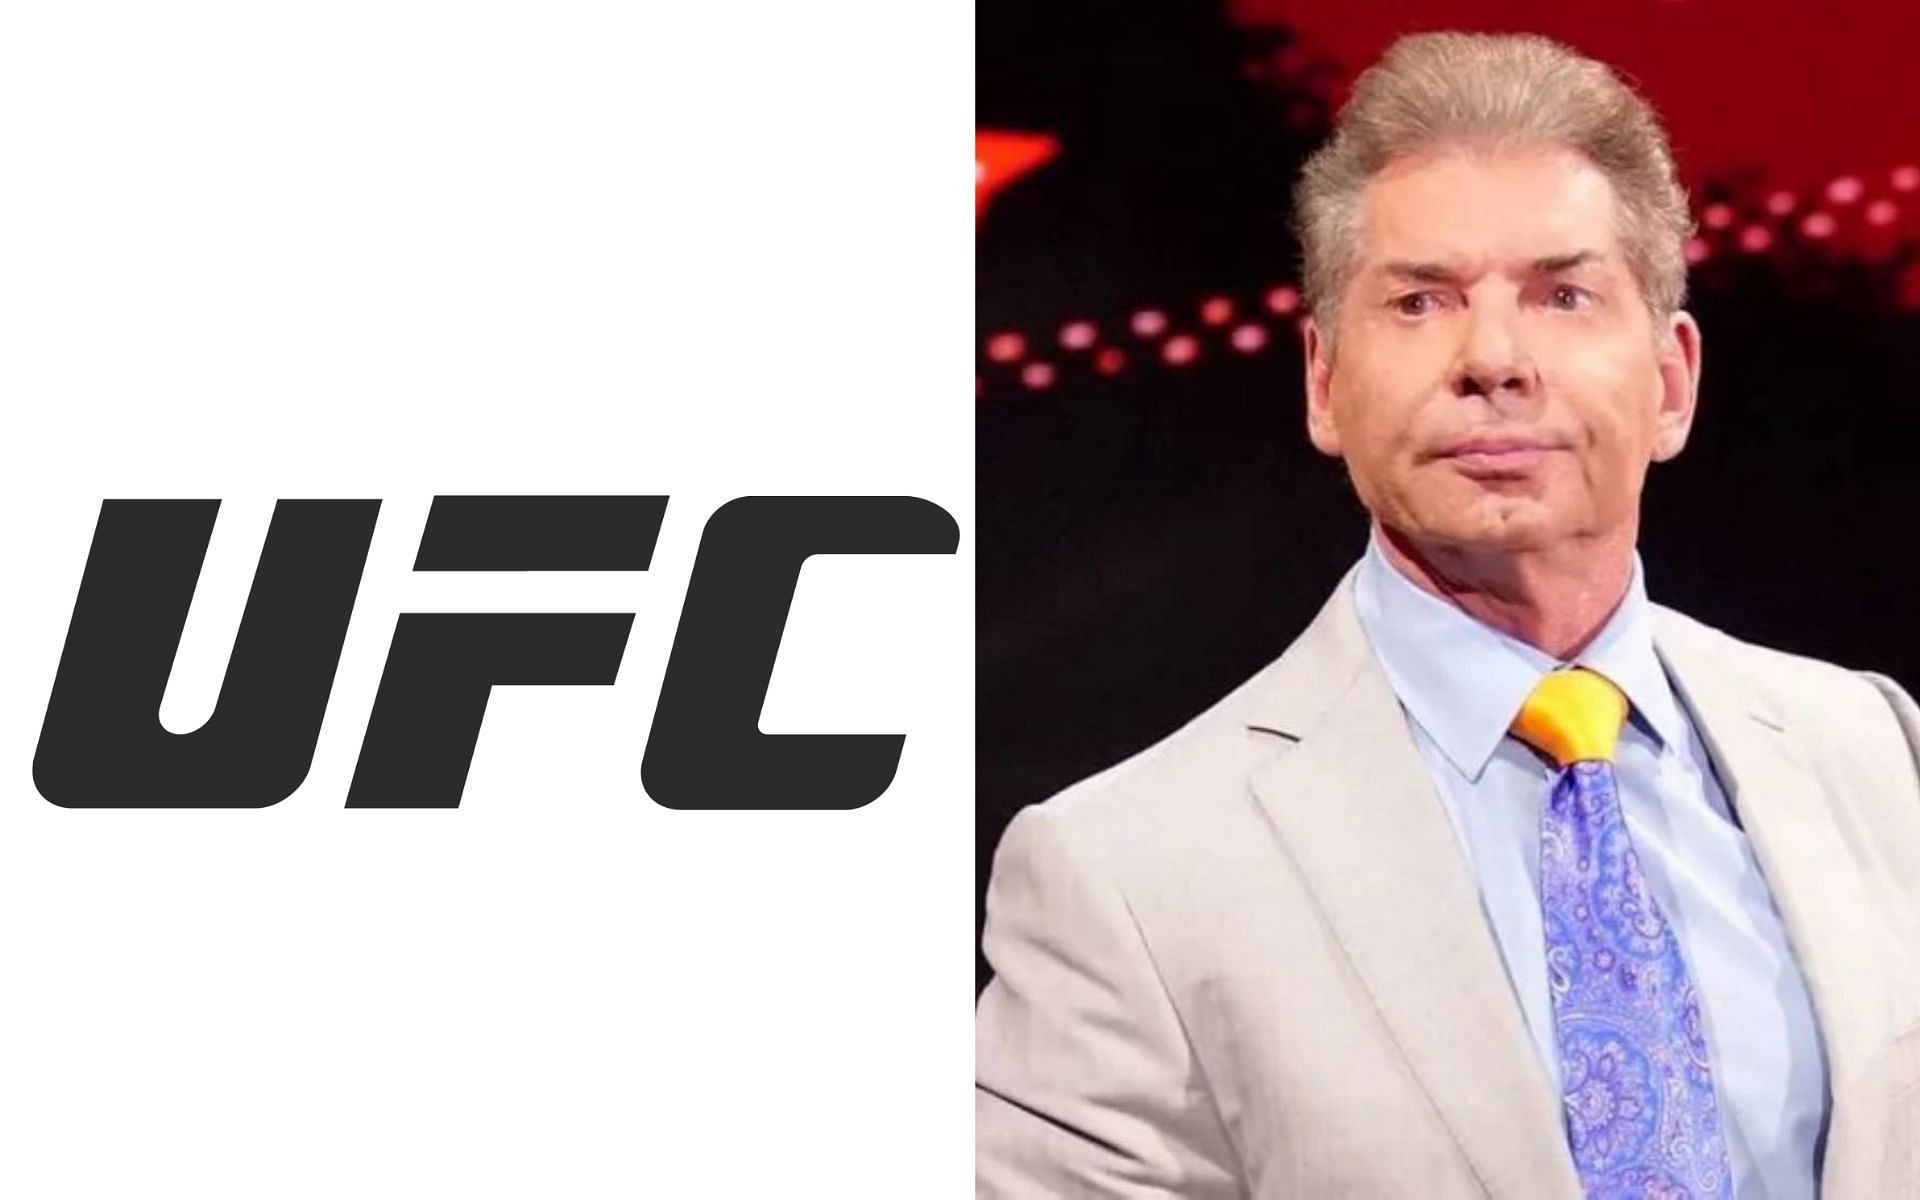 The McMahon-led company has hired many UFC fighters over the past few years.